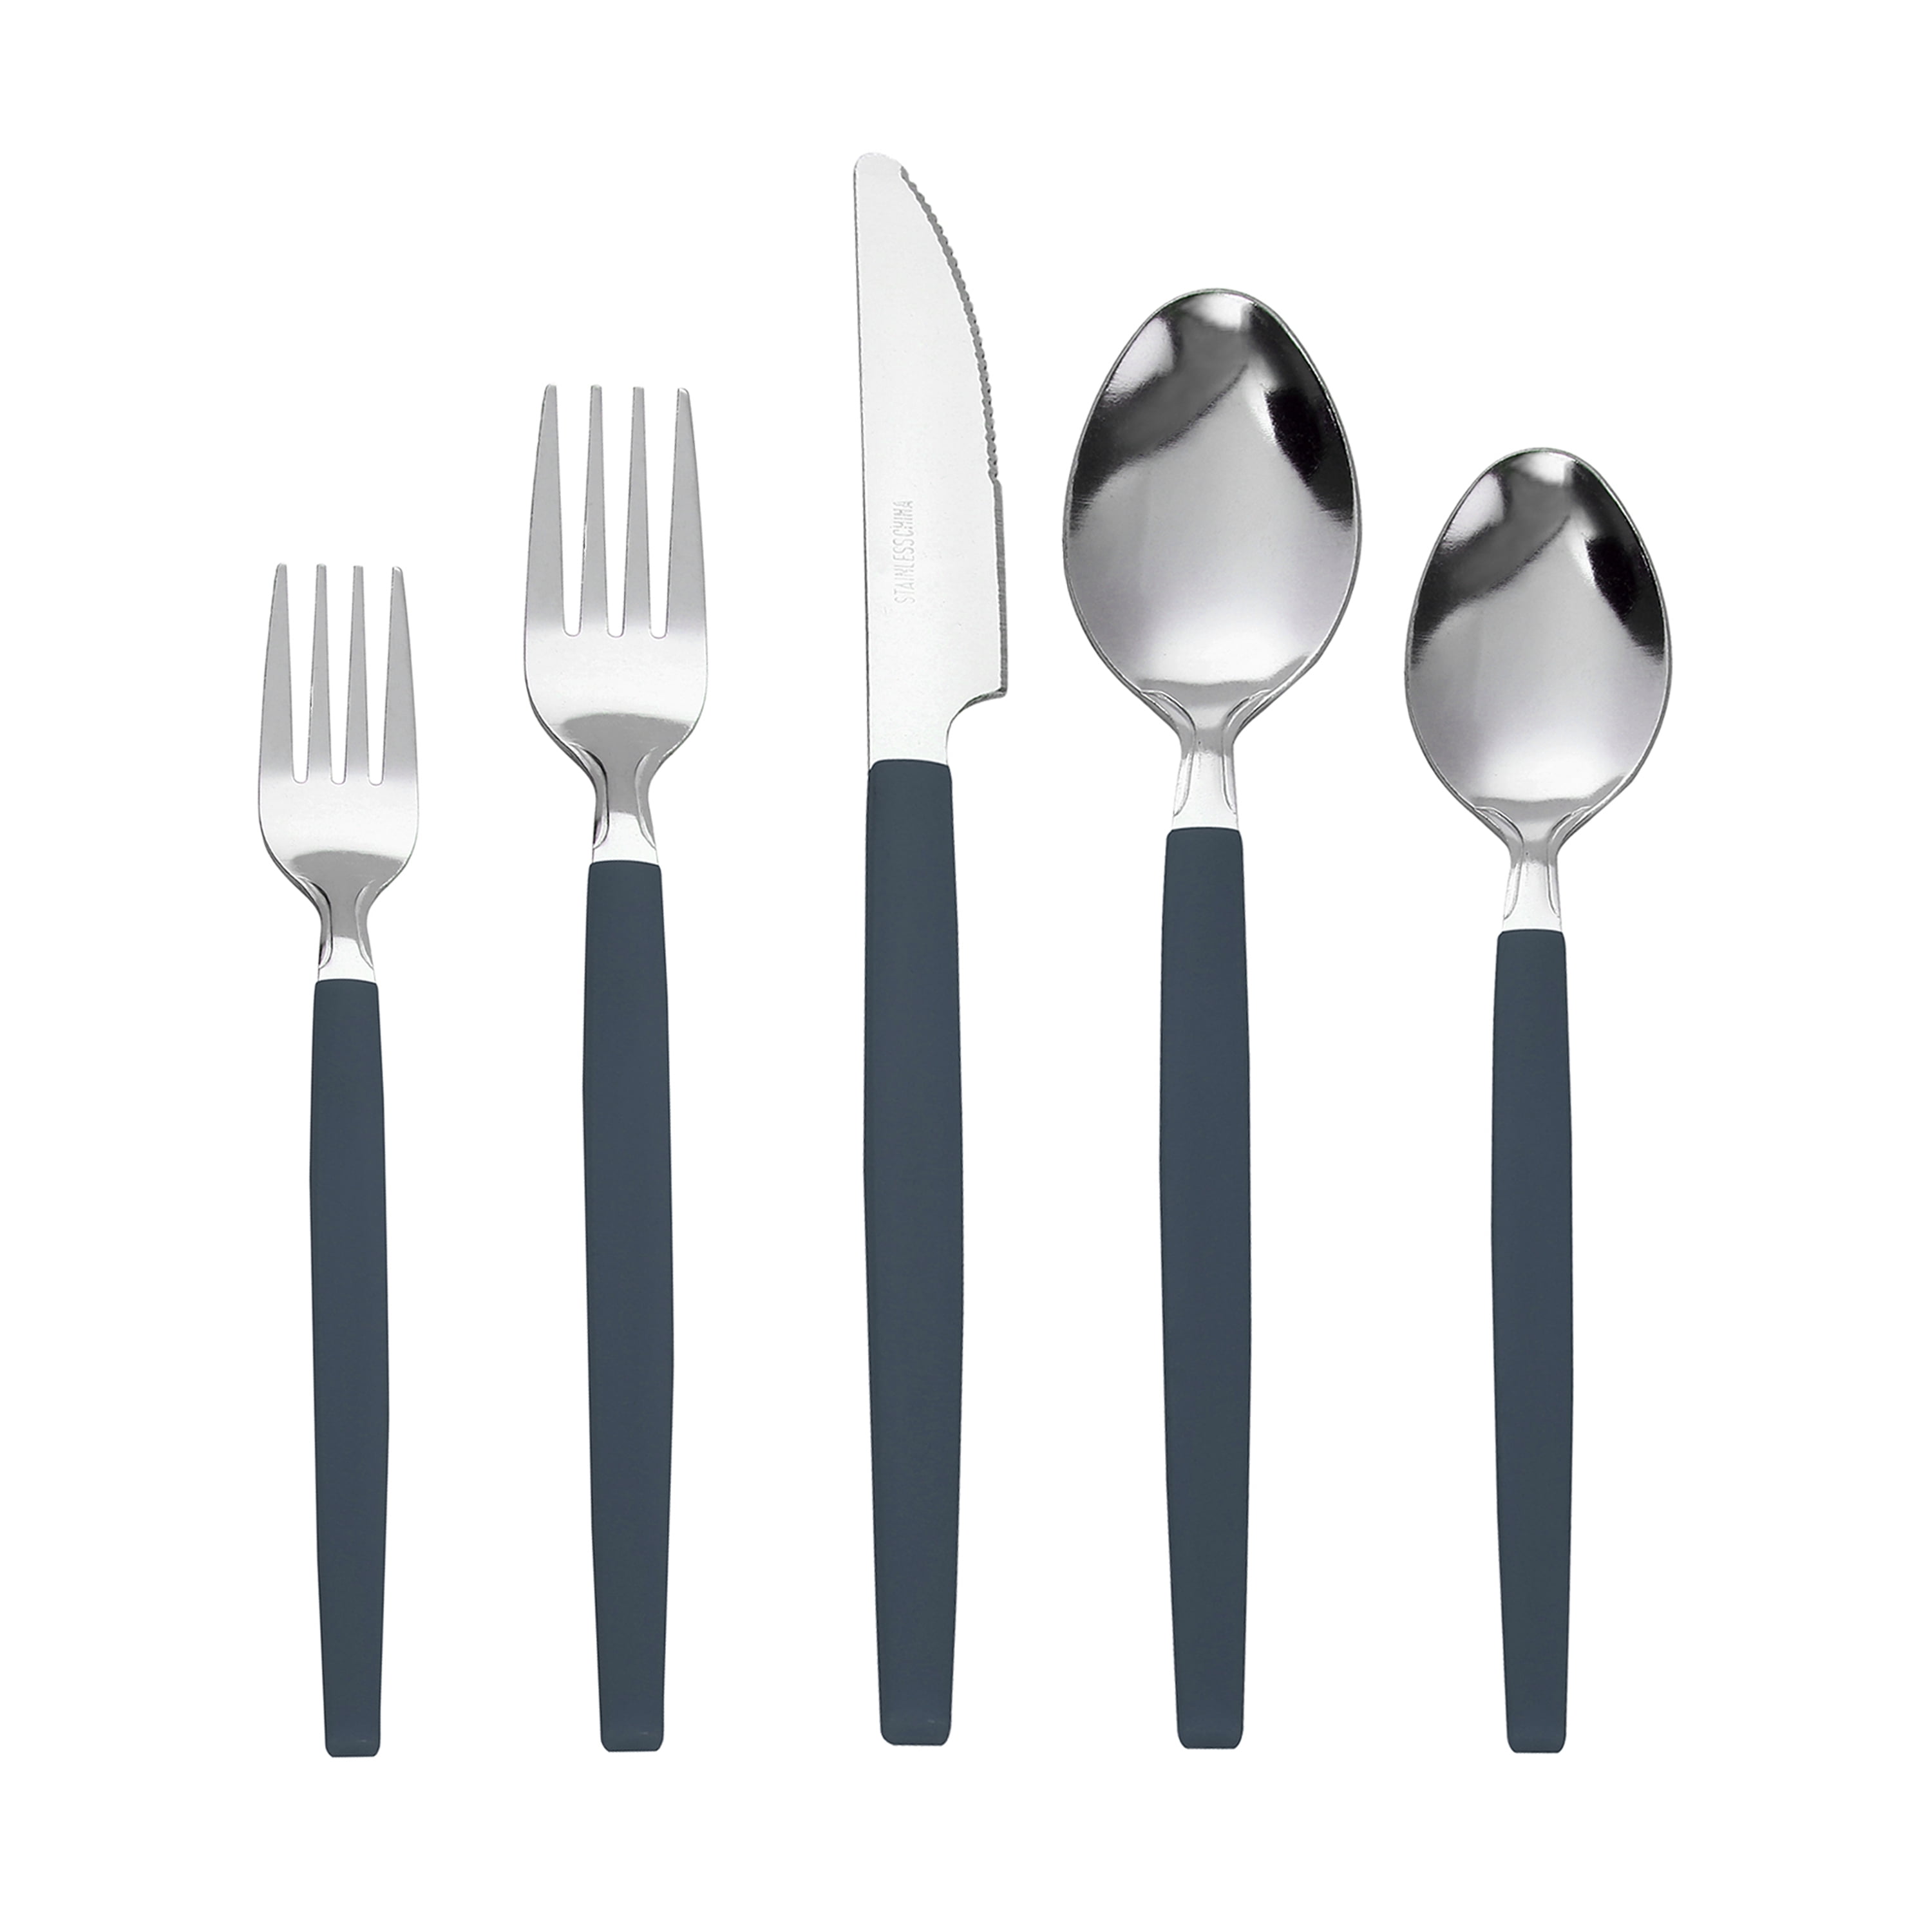 Mainstays 49 Piece Stainless Steel and Plastic Flatware Set with Tray, Blue Cove